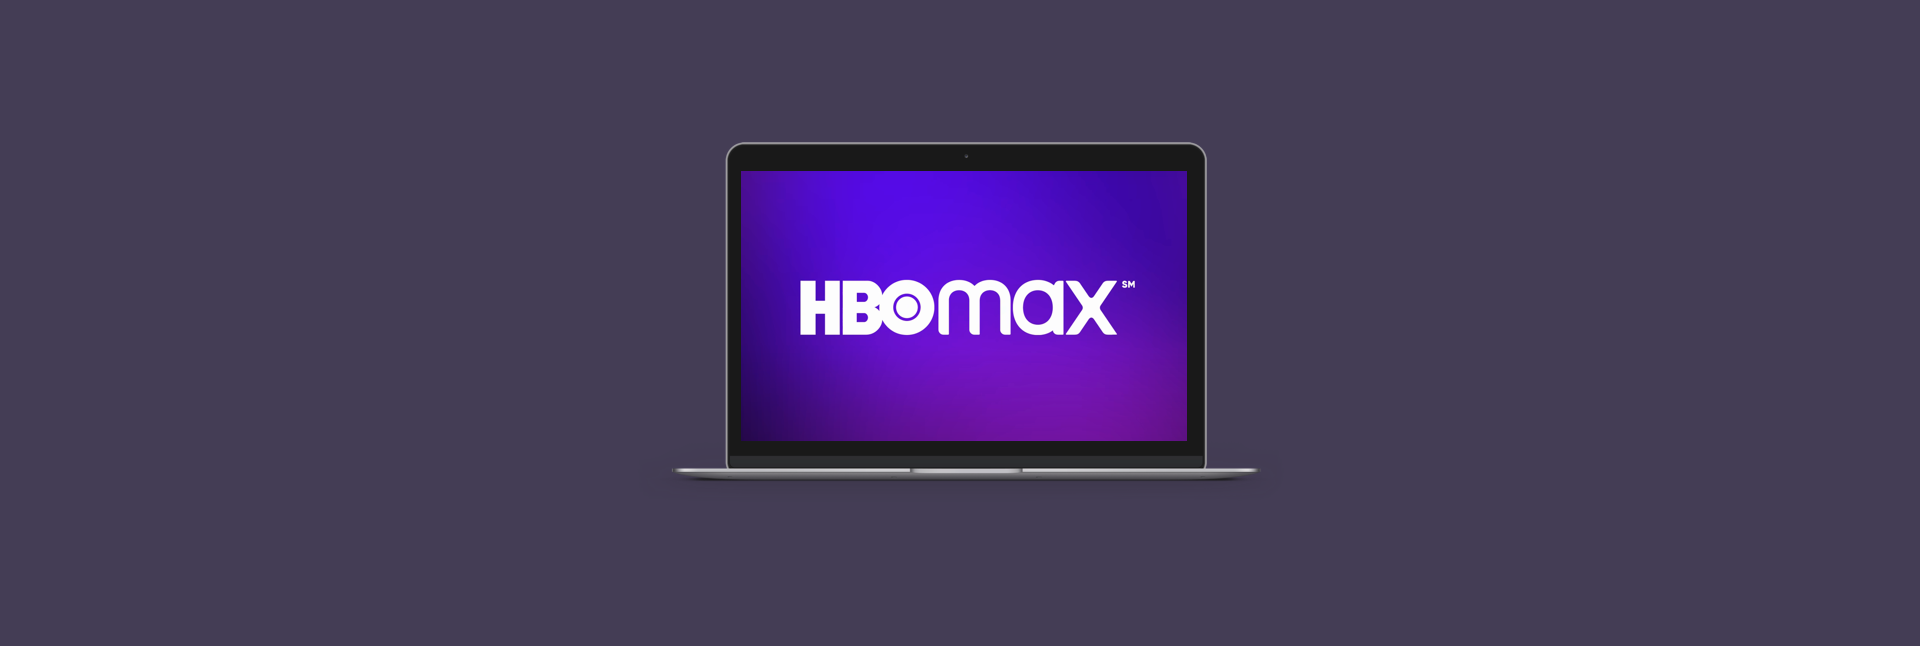 get hbo now on pc